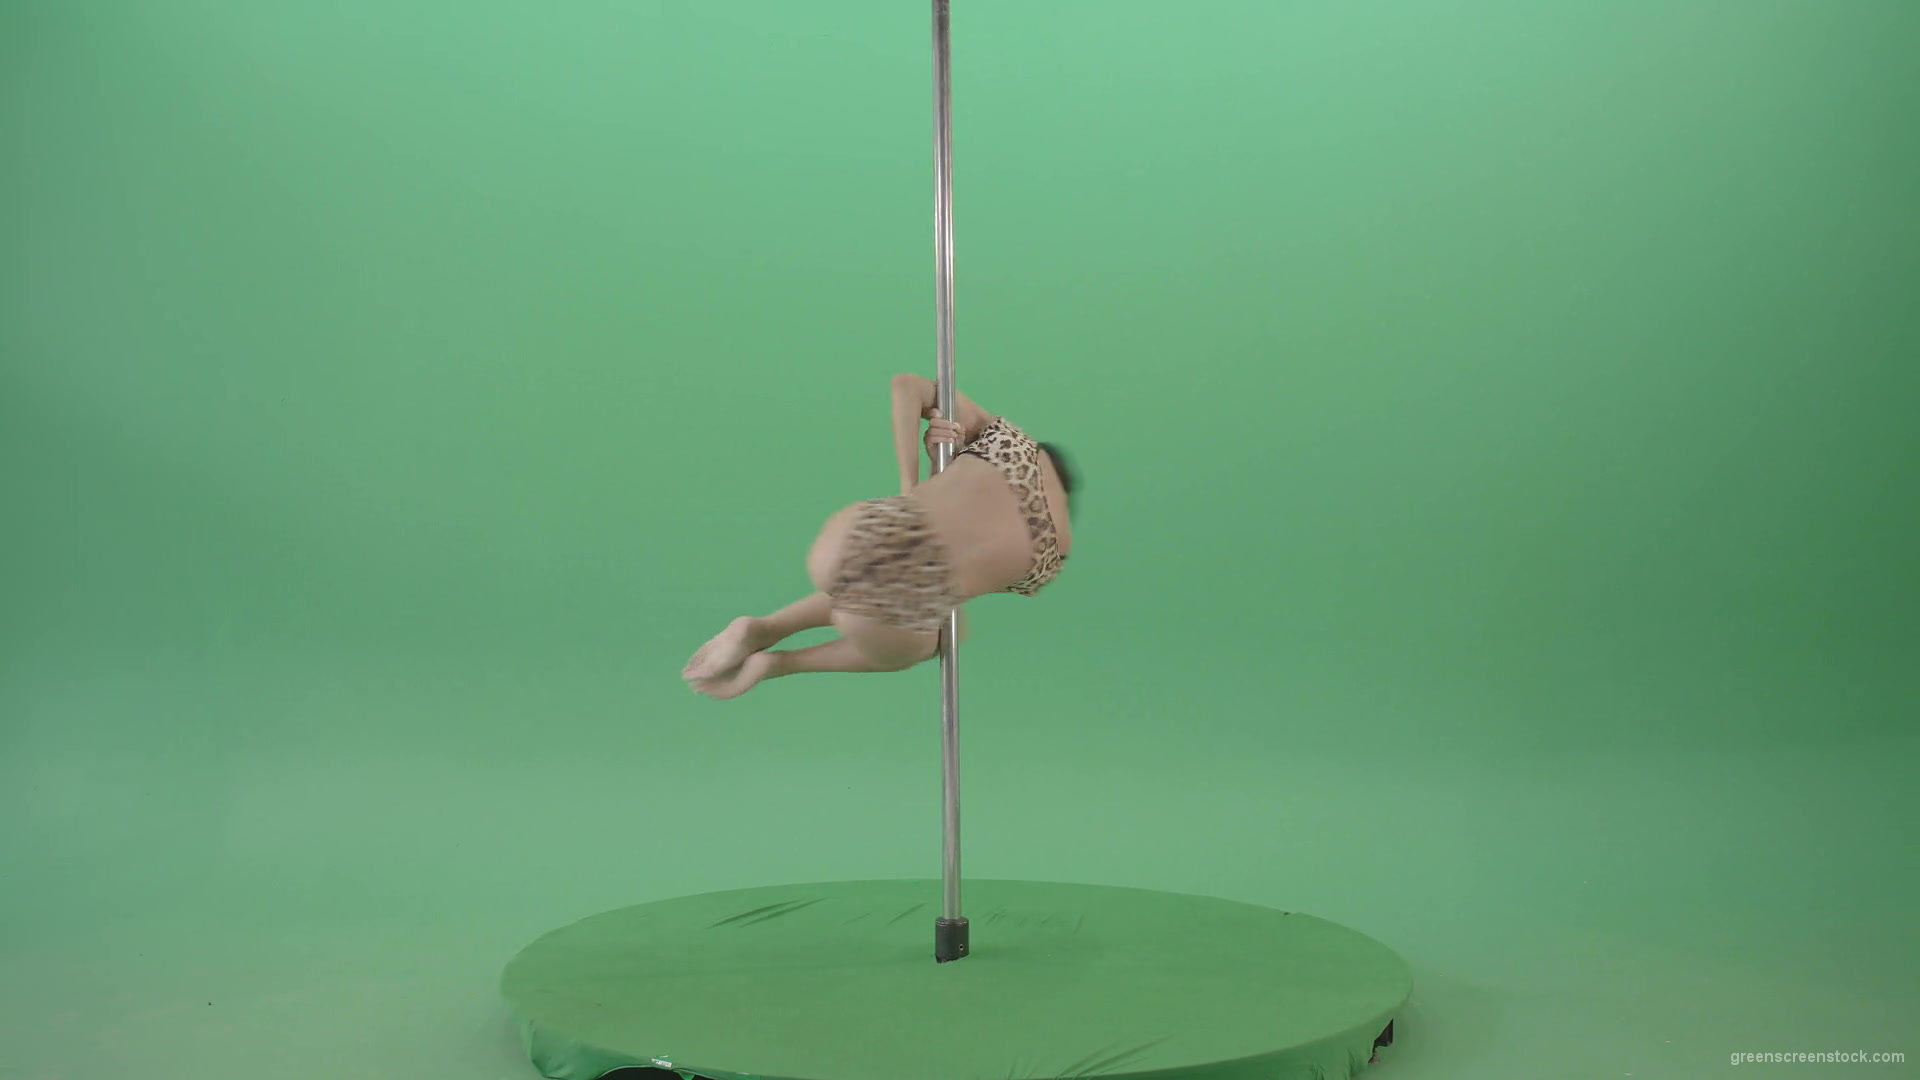 Gymnast-Girl-in-leopard-animal-underwear-spinning-fast-in-pole-dance-isolated-on-Green-Screen-4K-Video-Footage-1920_007 Green Screen Stock